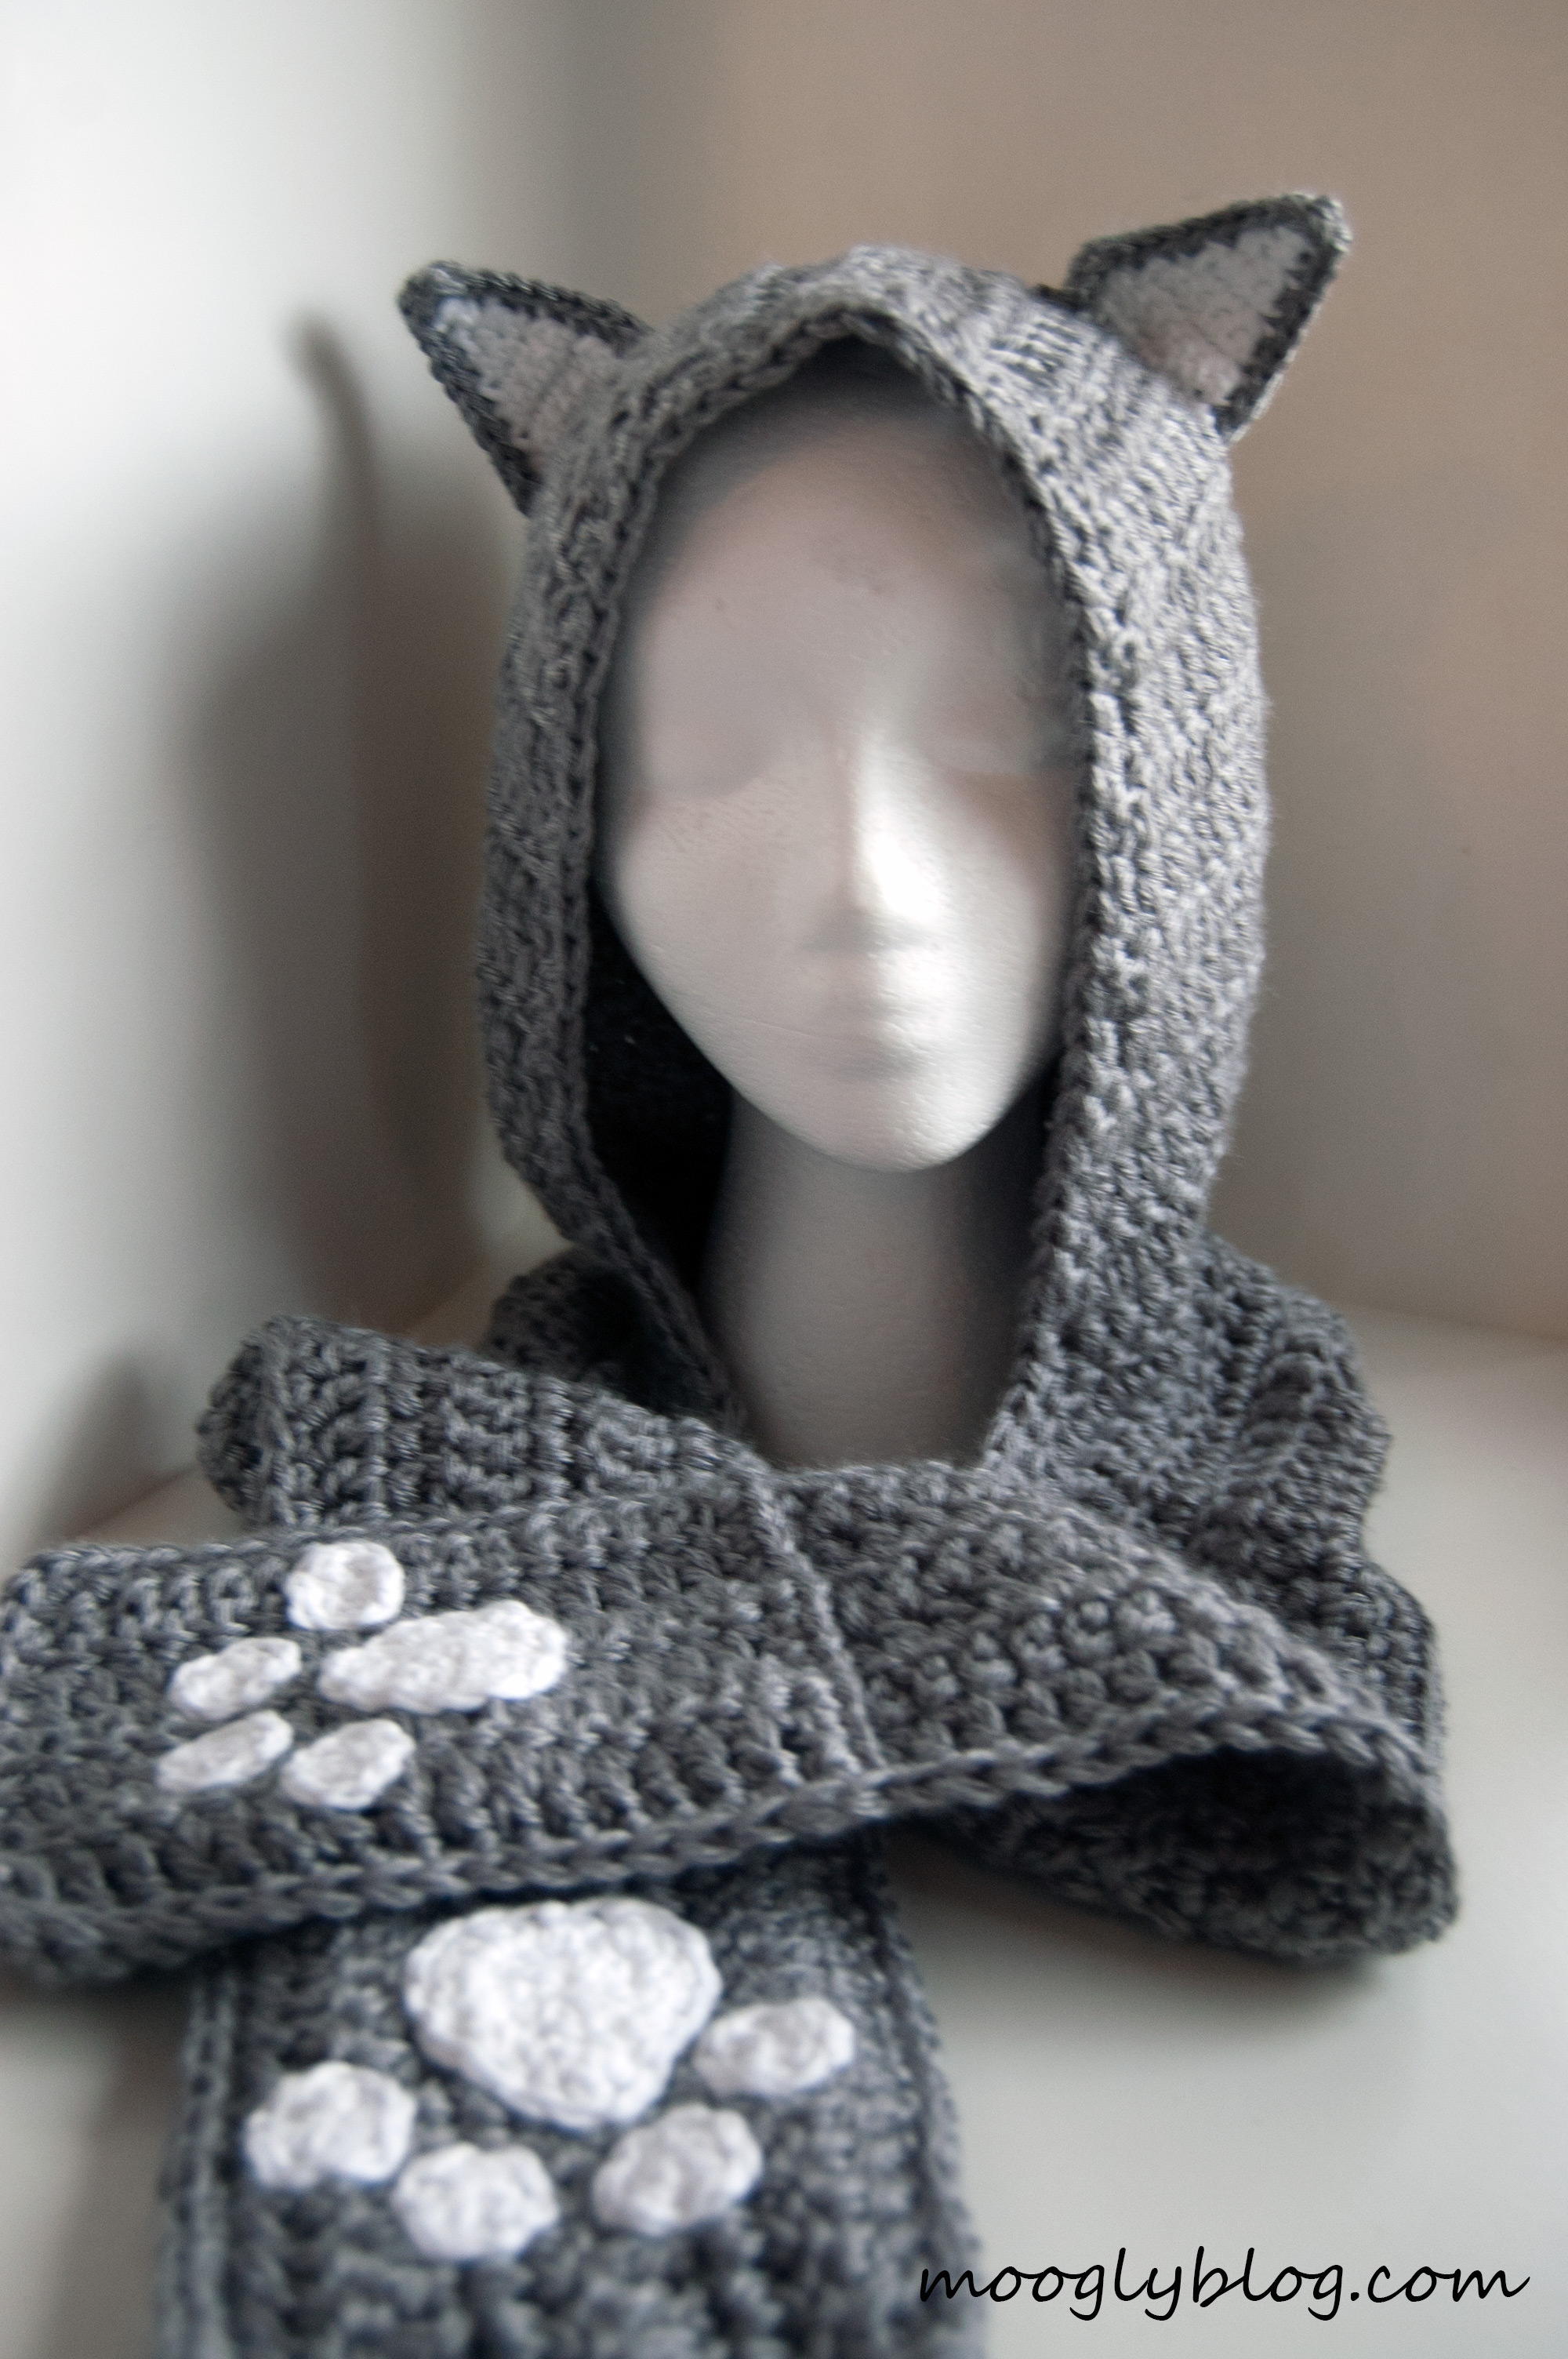 10+ Crochet Hooded Scarves and Cowls Patterns